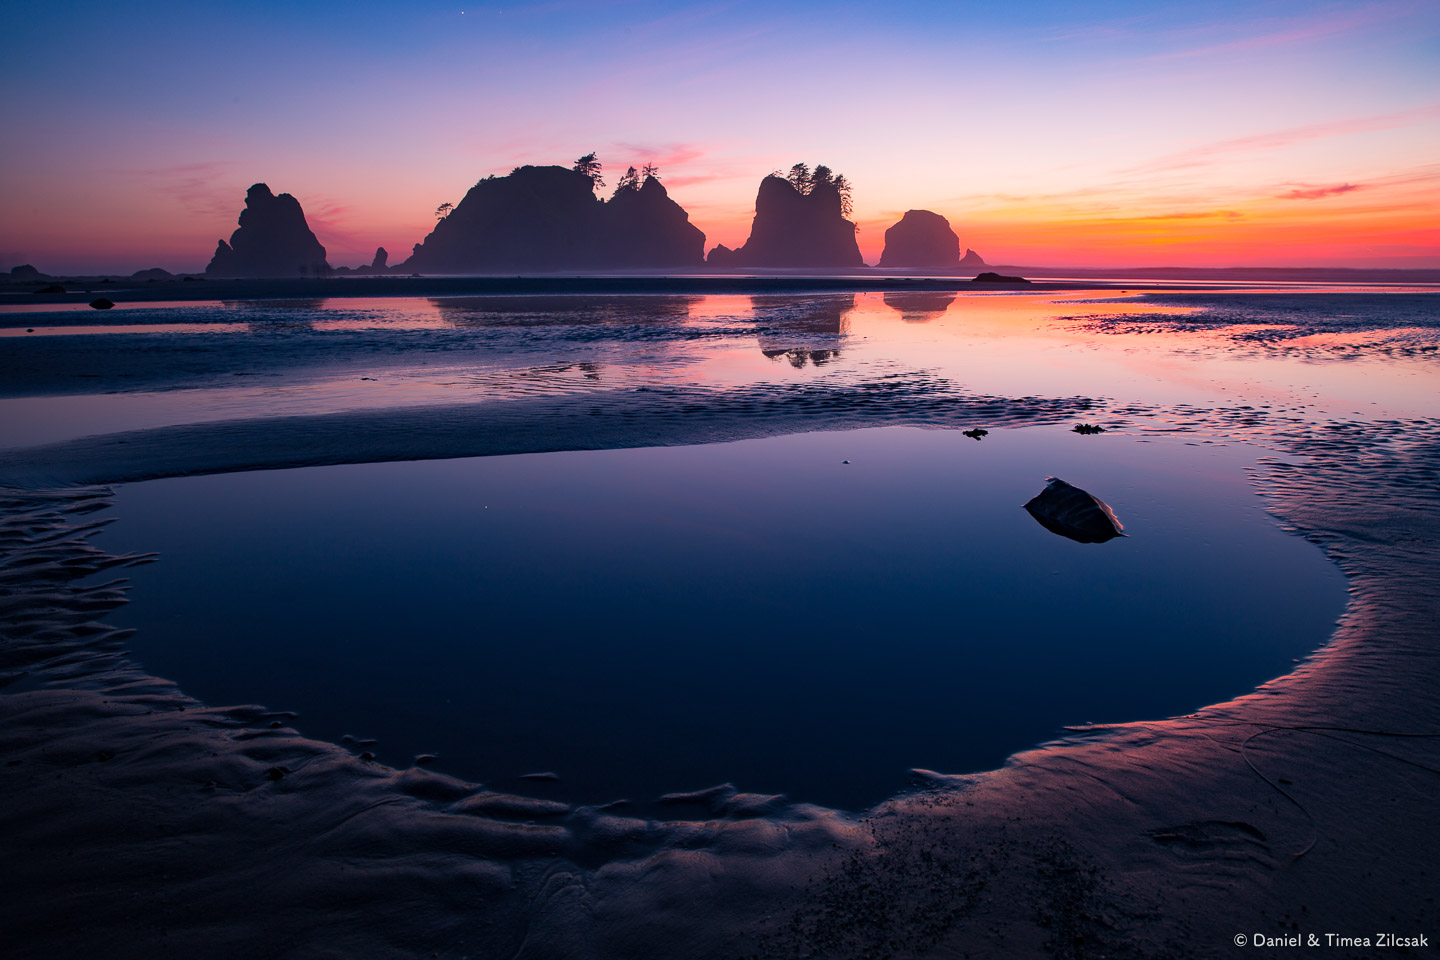 A surreal sunset at Shi Shi Beach and Point of the Arches